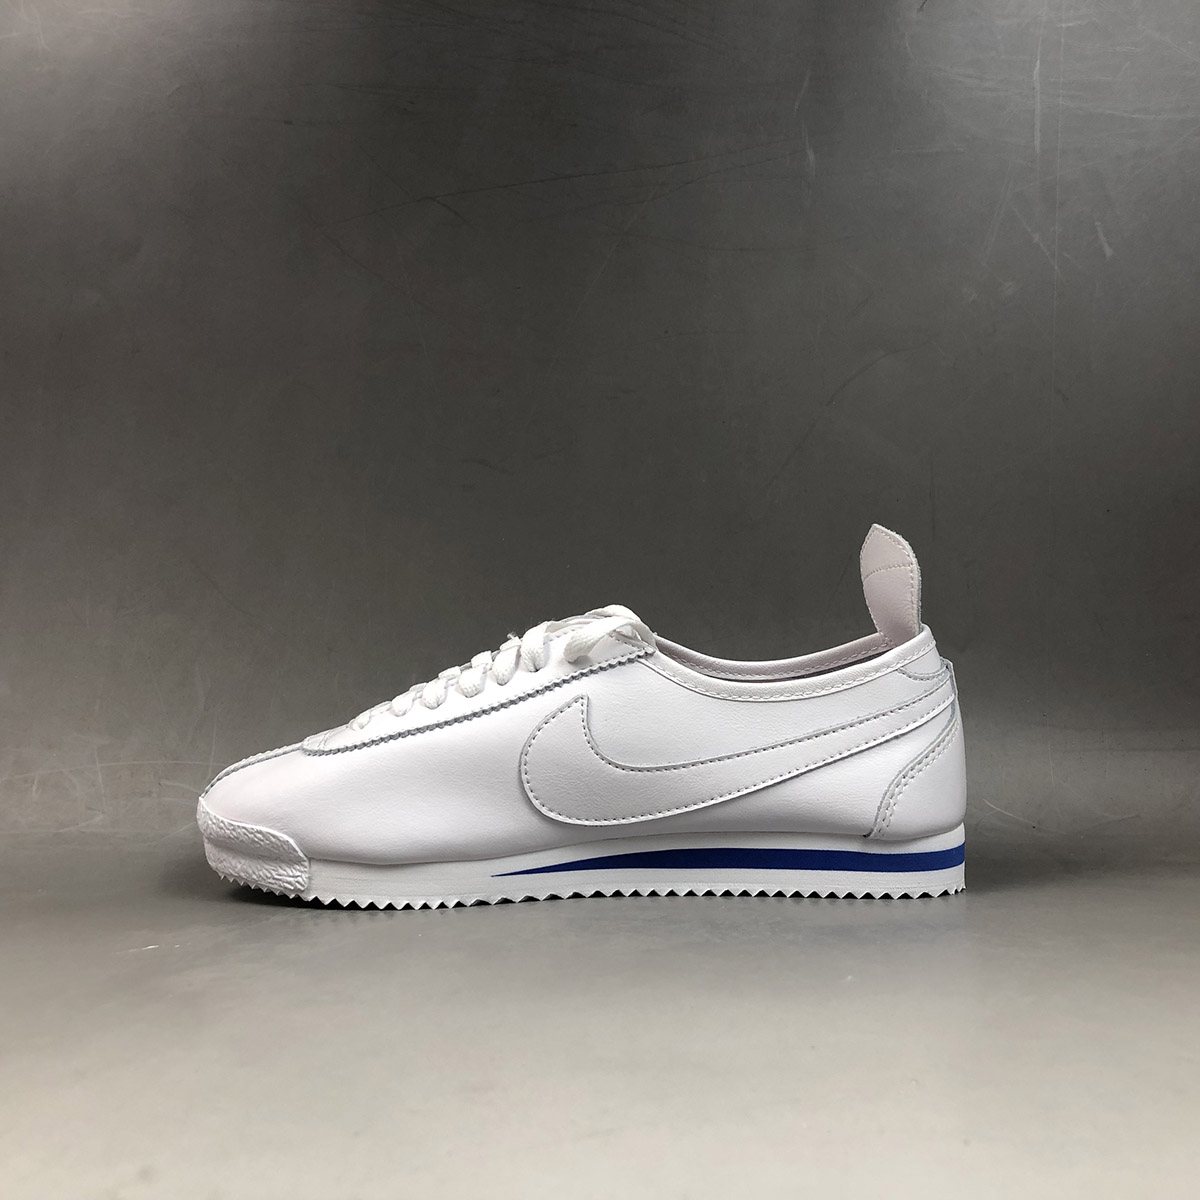 nike cortez 72 for sale